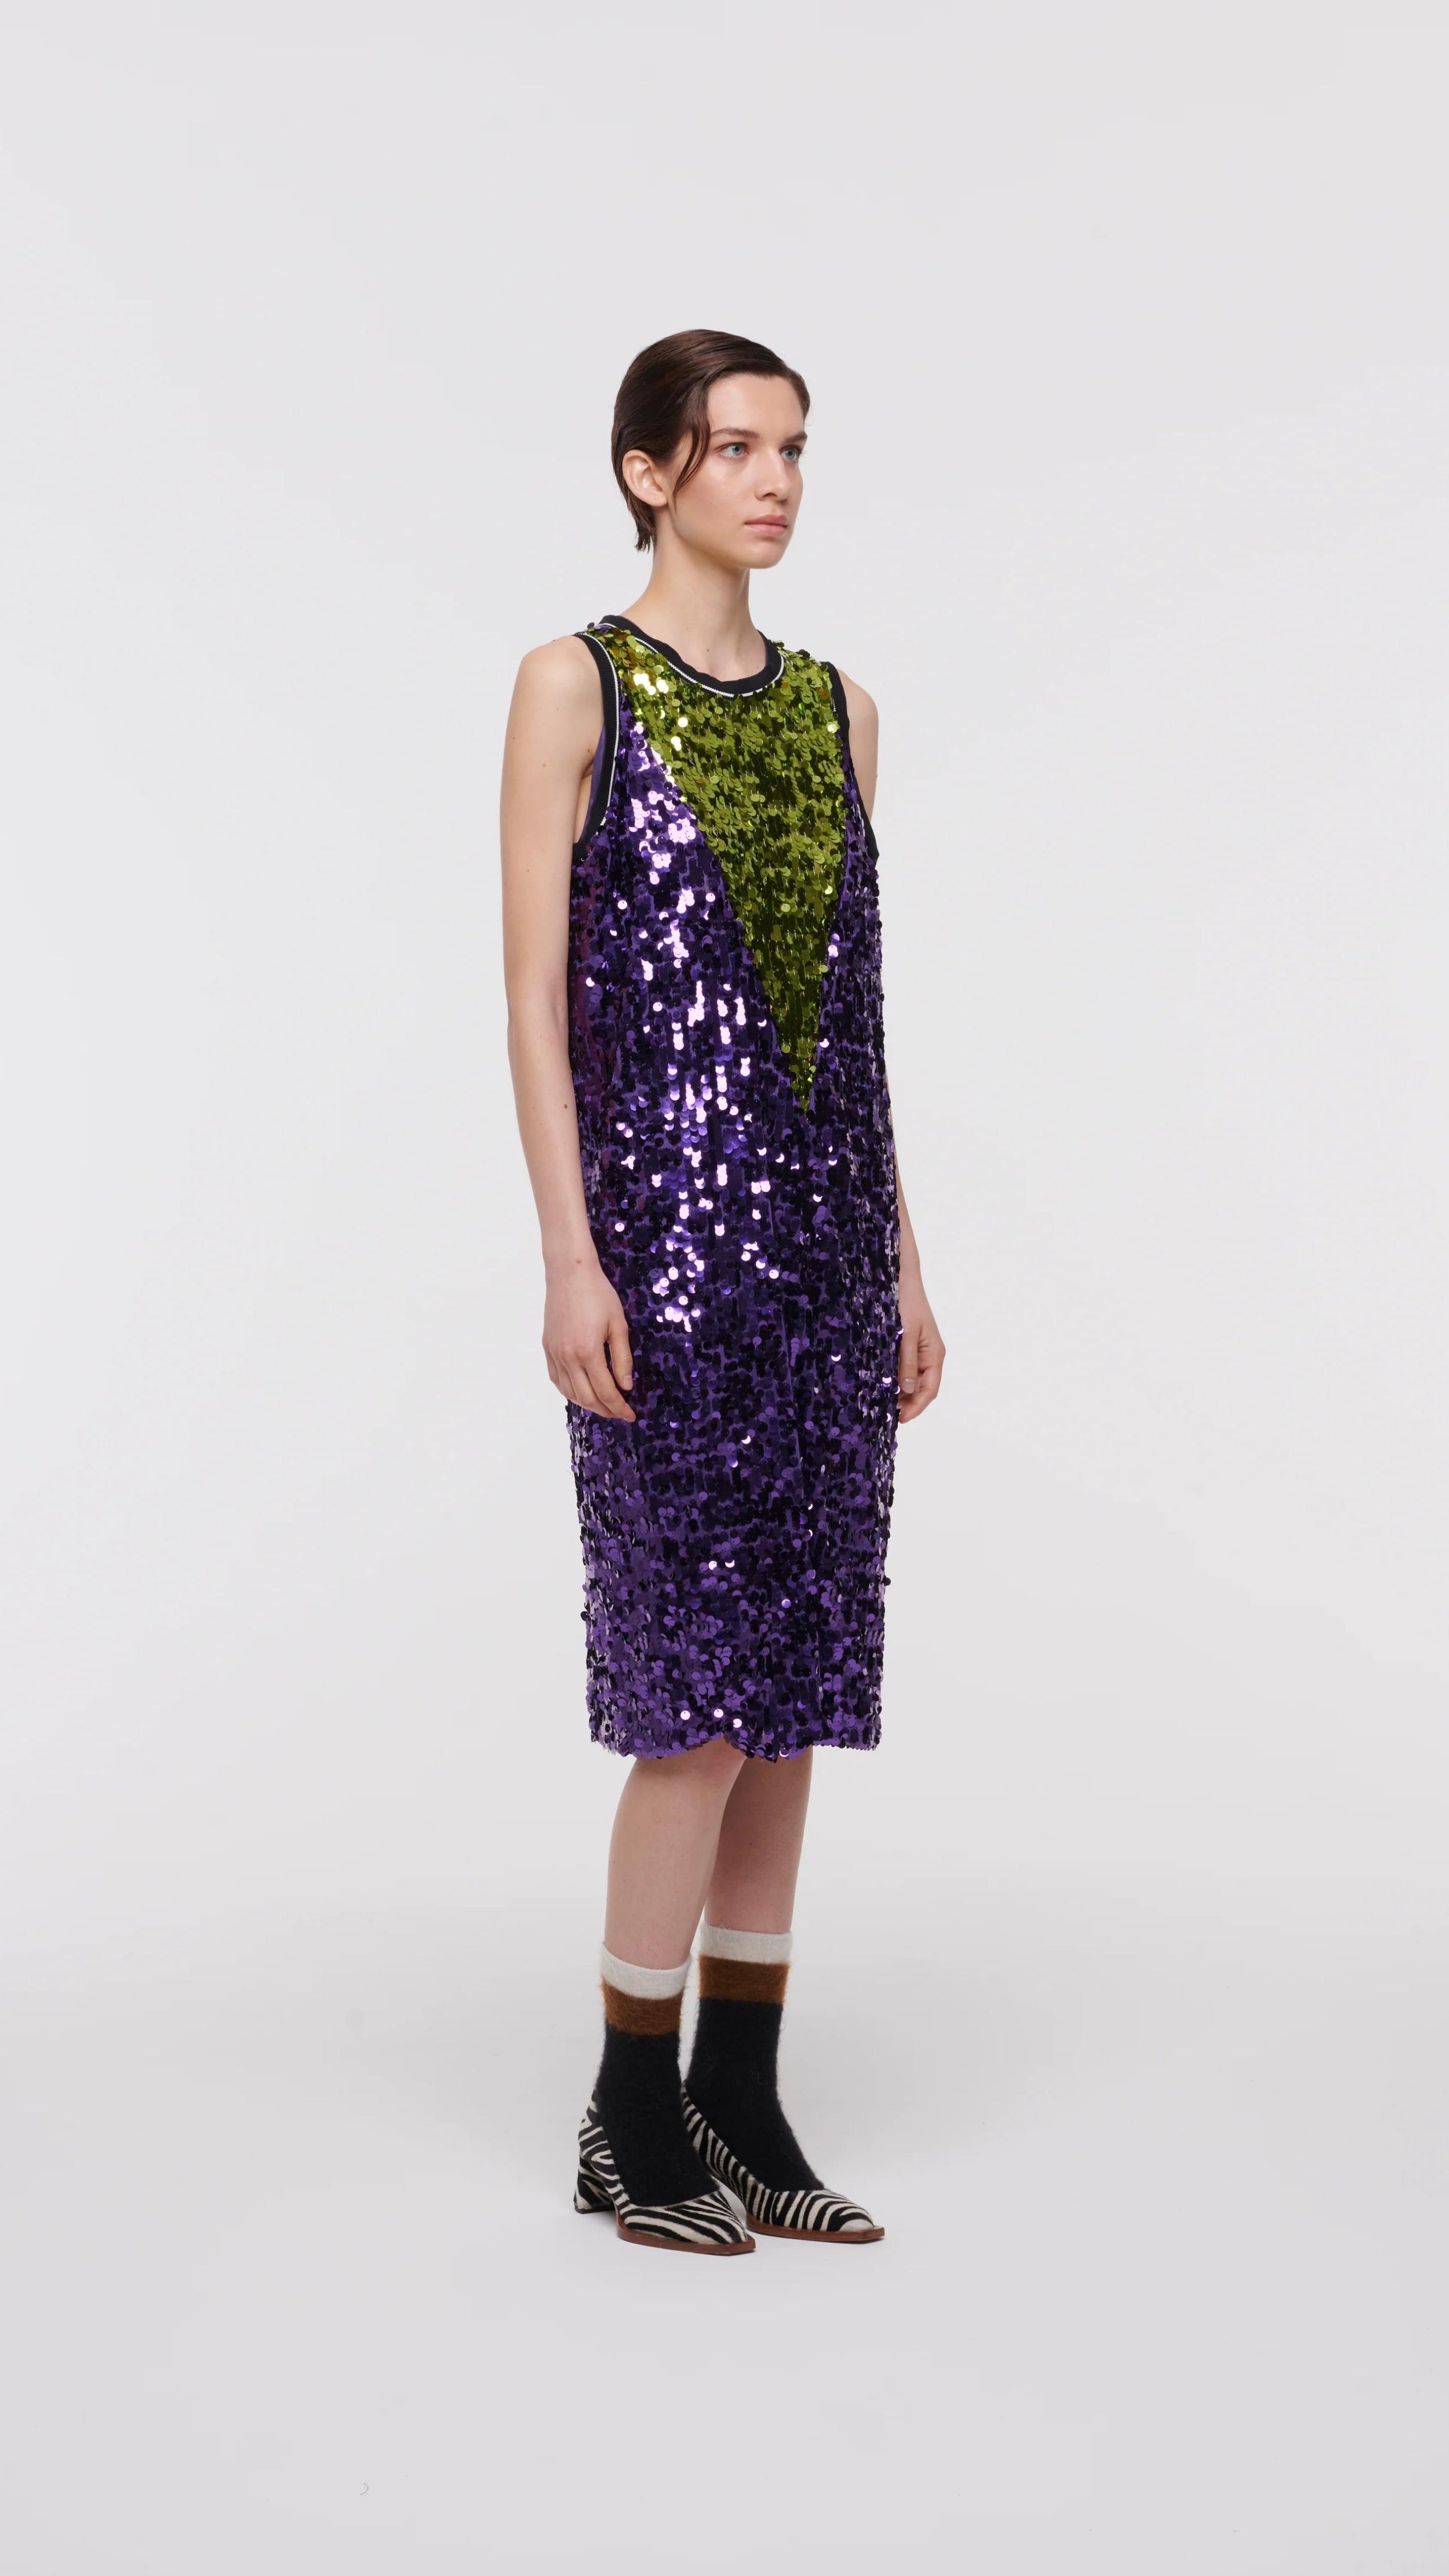 Plan C Color Block Sequin Dress. Sleeveless racer back style midi length dress in purple and lime green. Trimmed in black at the neckline and arms. The green sequins form a v shape in the front. Shown on model facing forward.